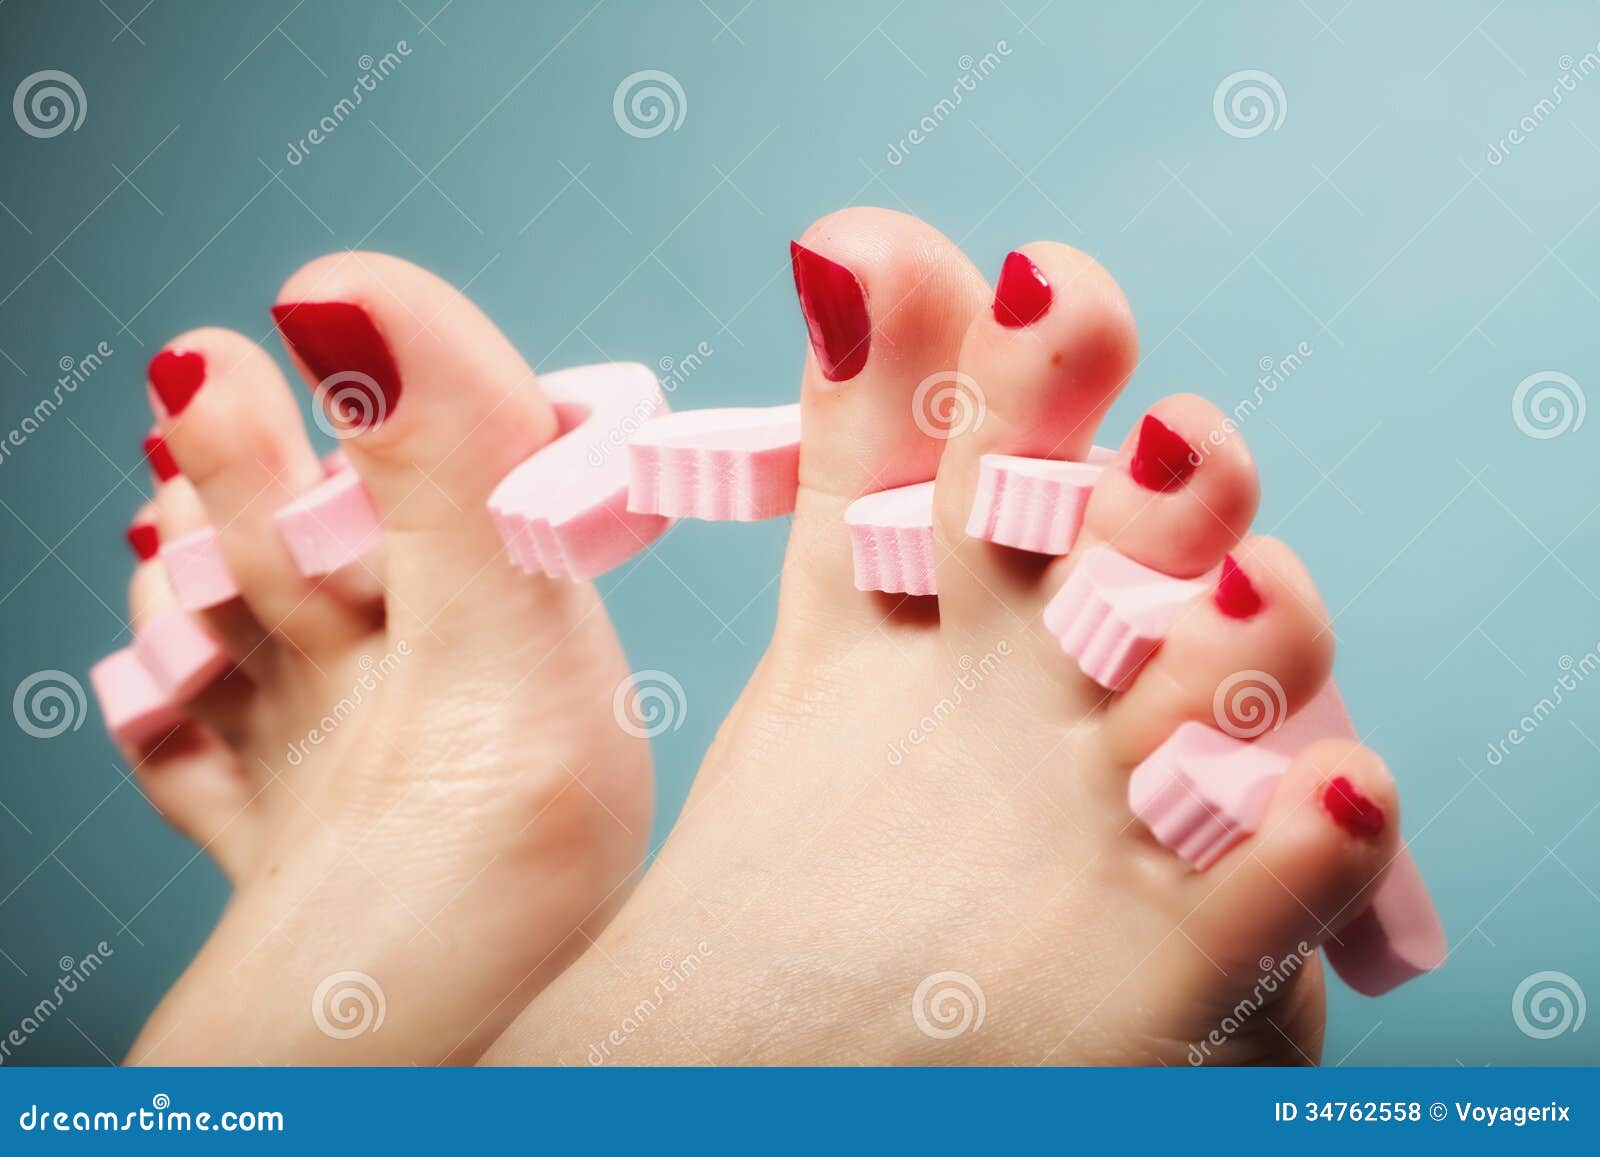 Foot Pedicure Applying Red Toenails on Blue Stock Photo - Image of ...